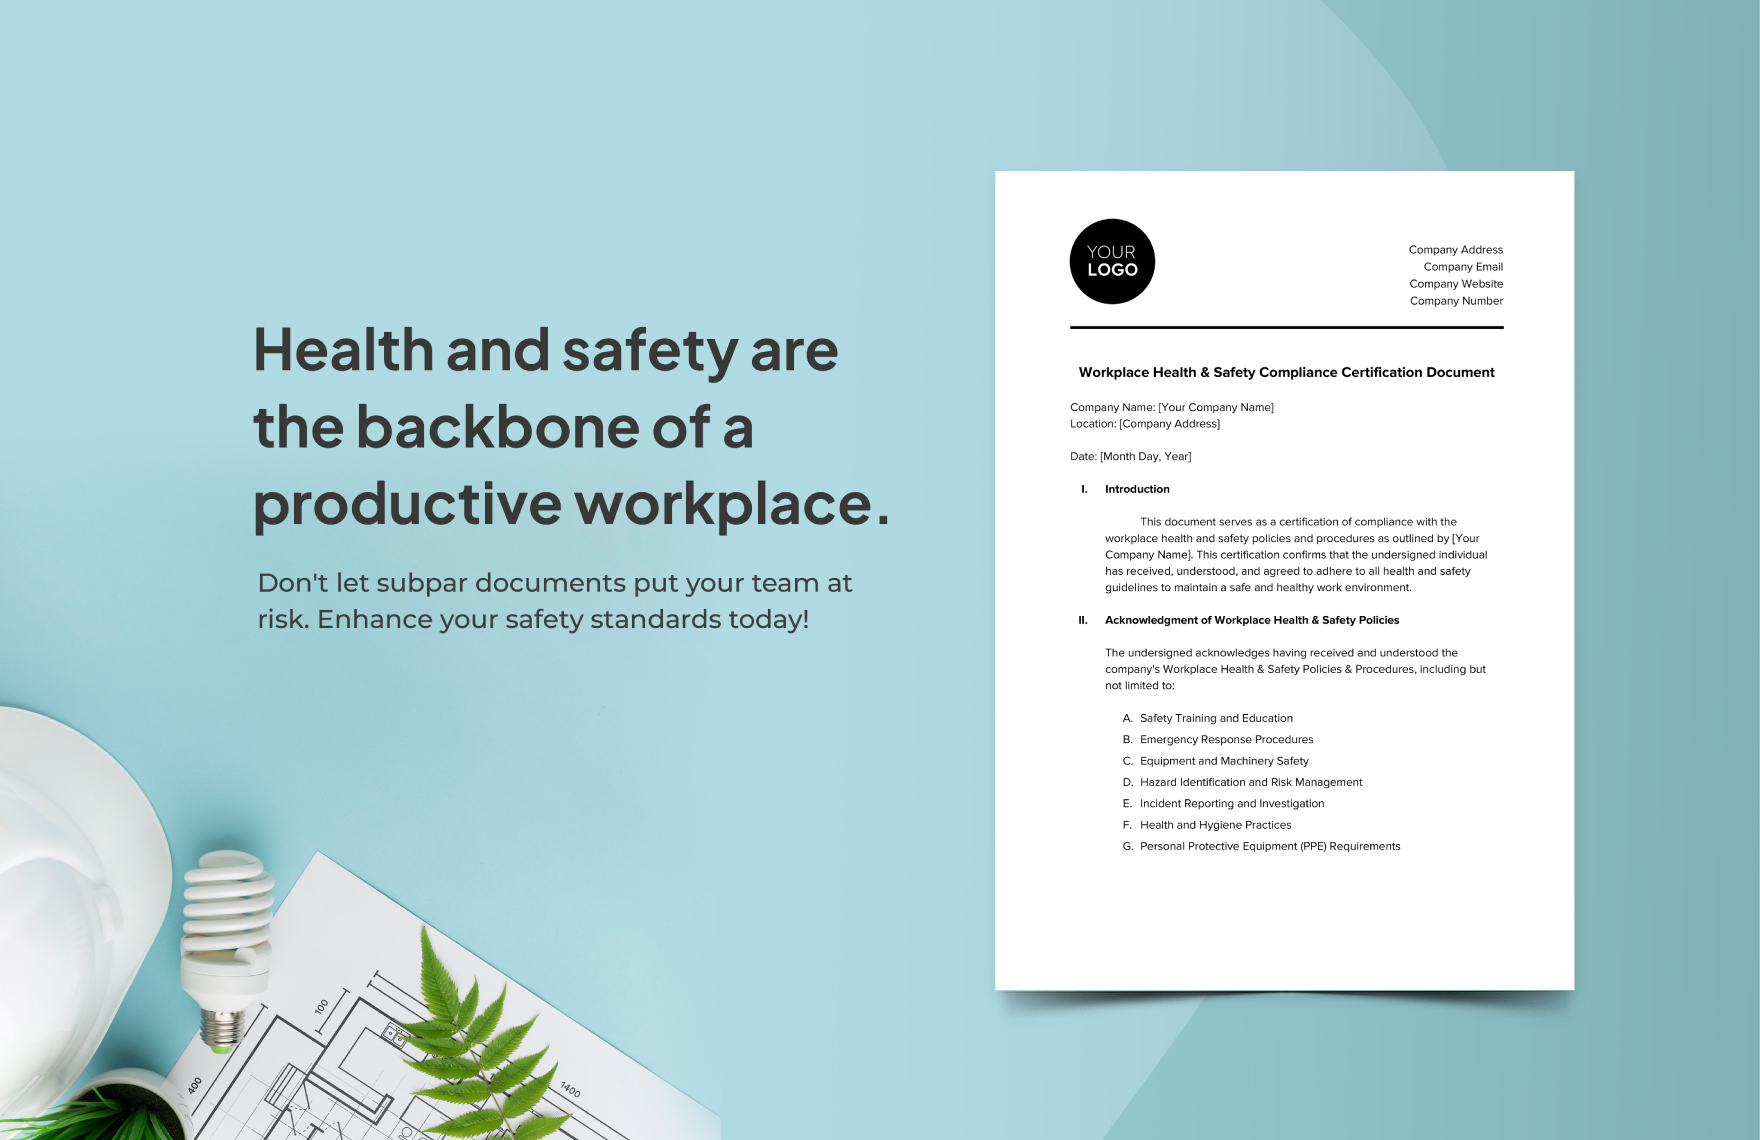 Workplace Health & Safety Compliance Certification Document Template